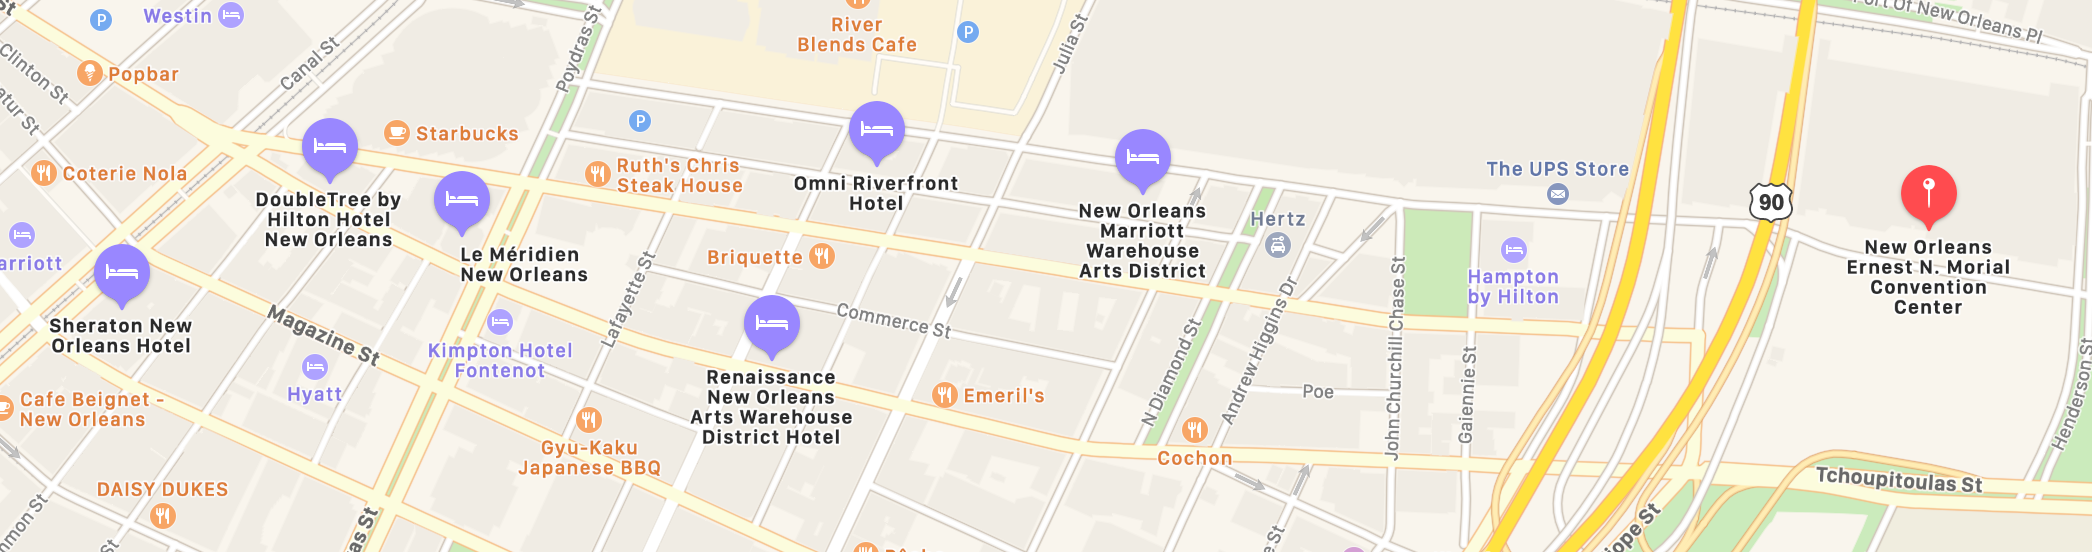 A map of New Orleans showing the hotels and CHI's location at the convention center.